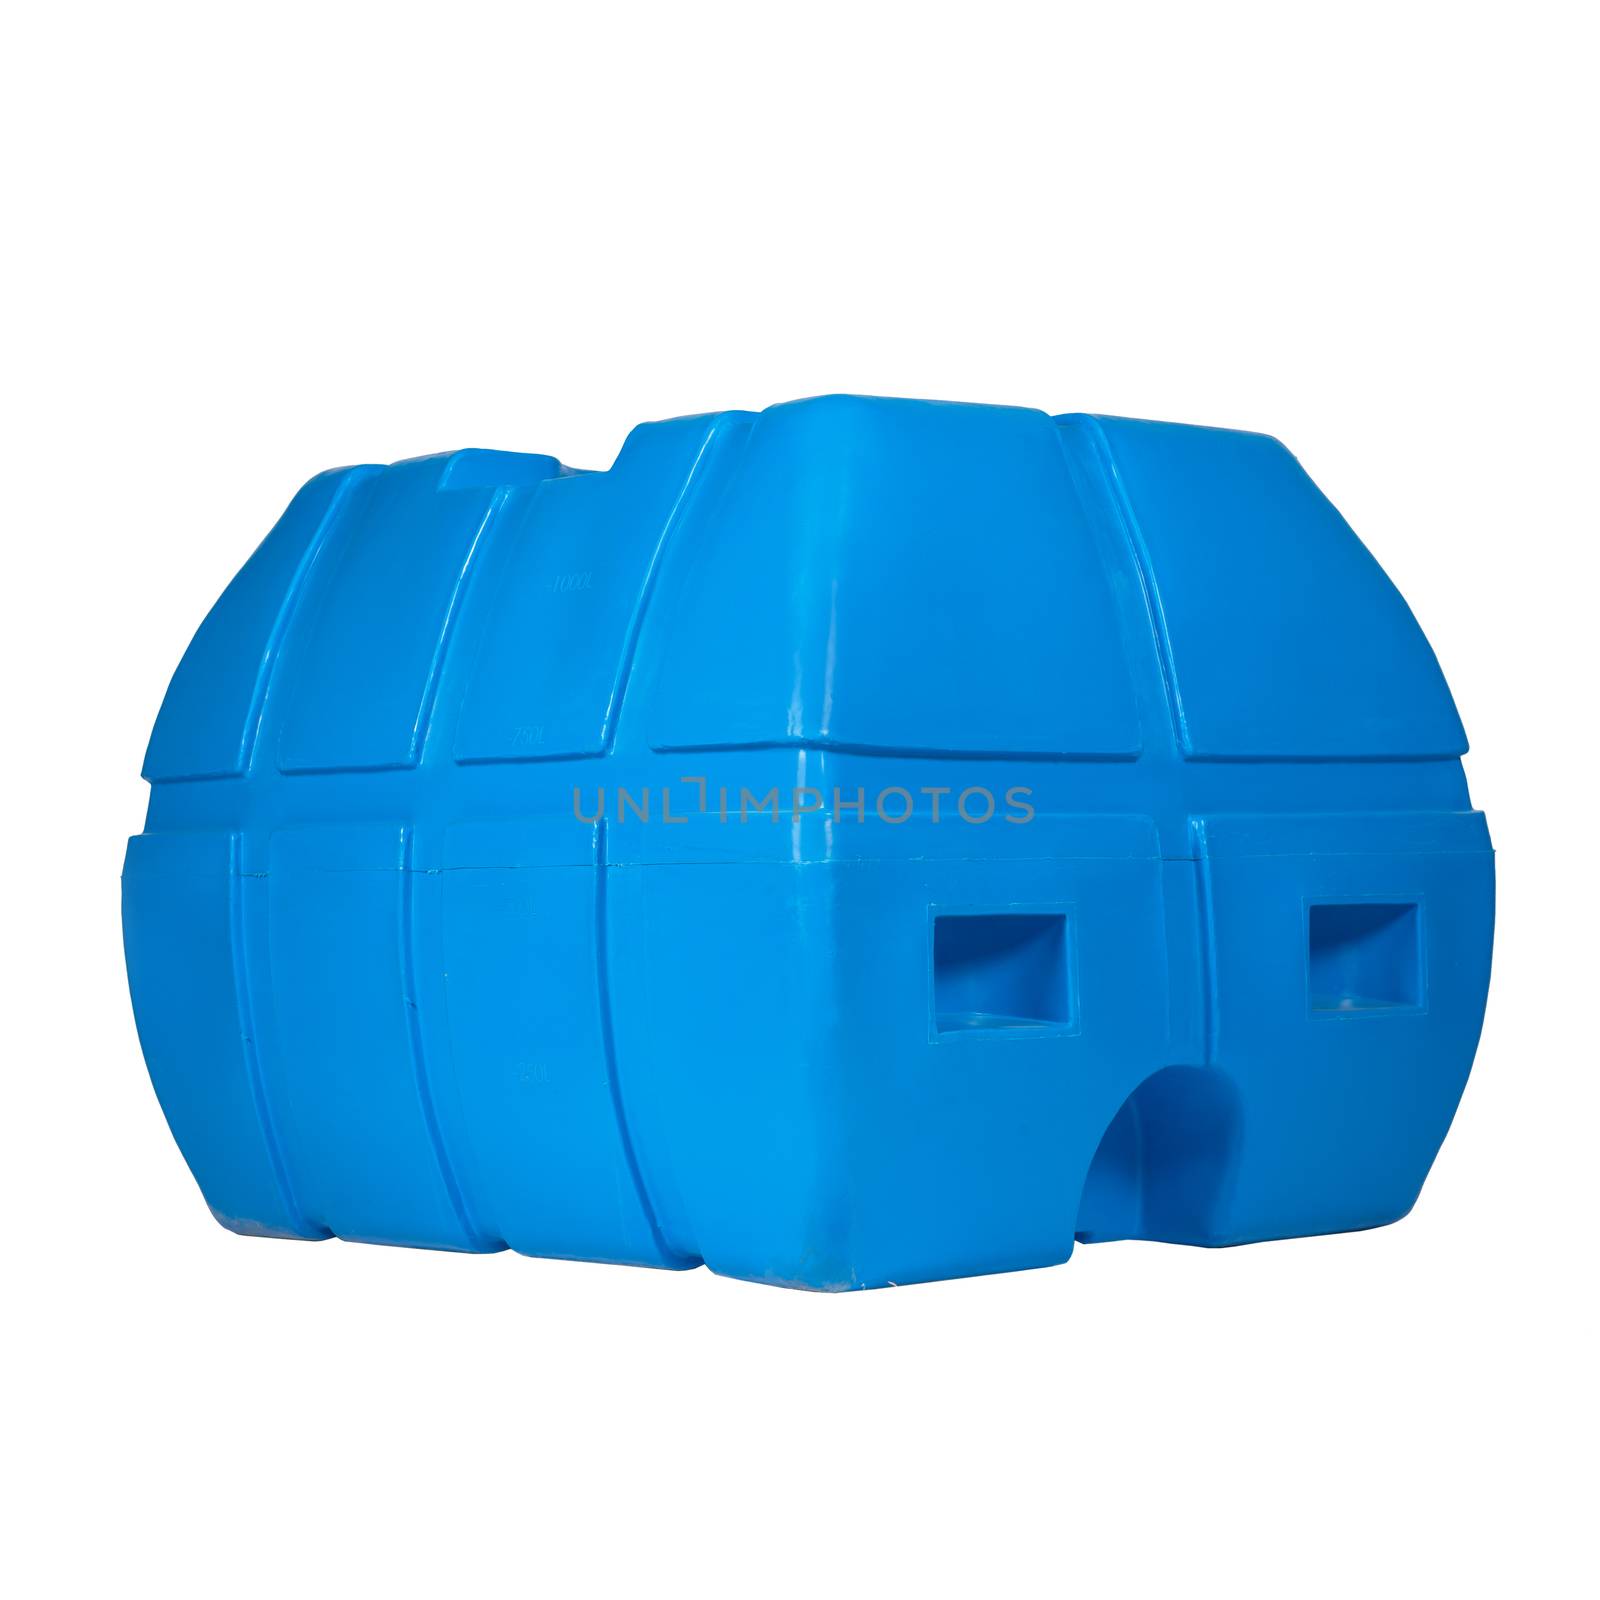 Big plastic container by deamles